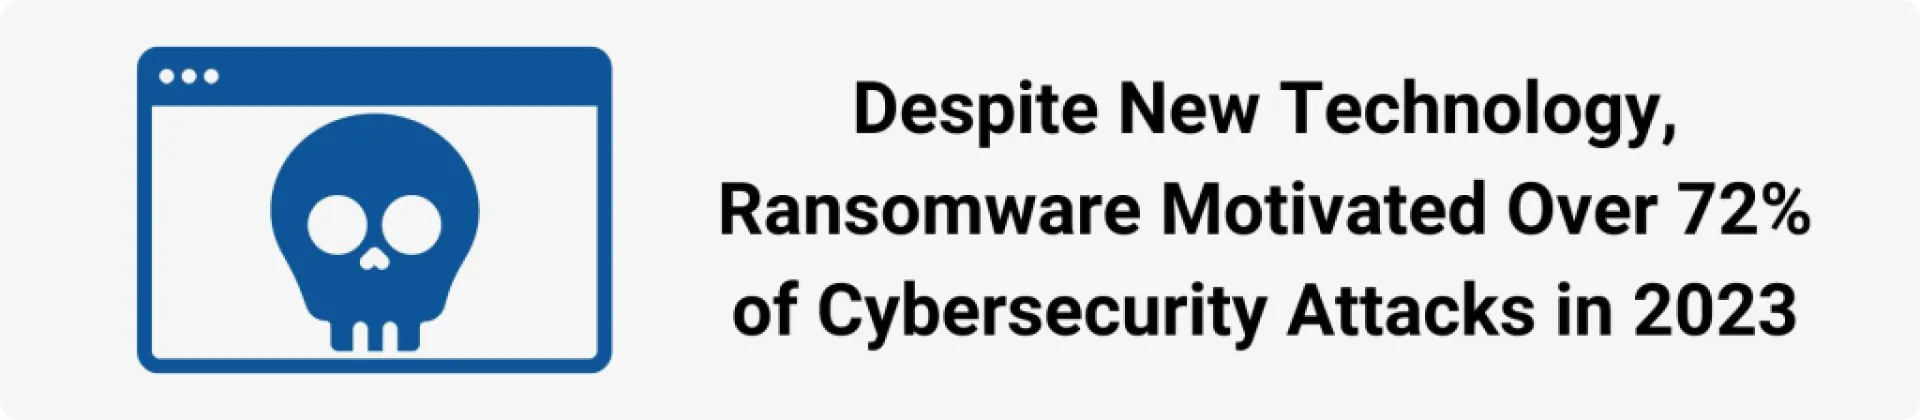 Despite New Technology, Ransomware Motivated Over 72% of Cybersecurity Attacks in 2023